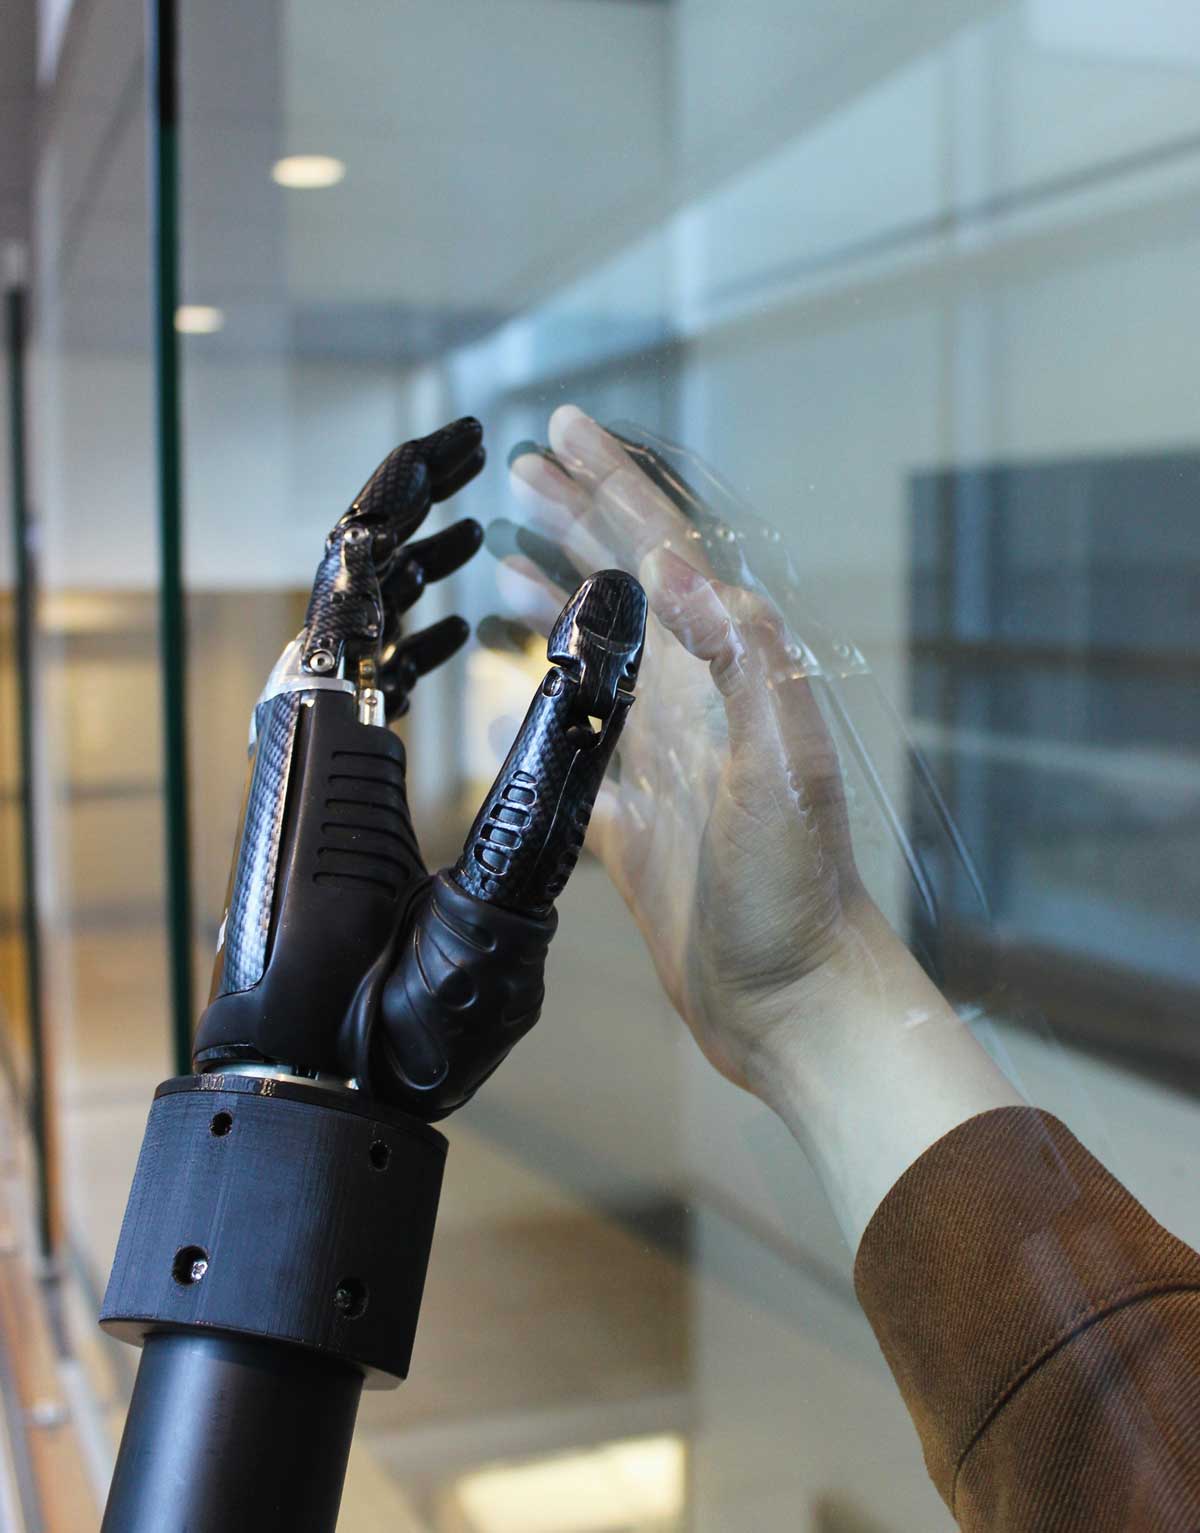 A bionic prosthesis and a human hand, separated by a glass barrier